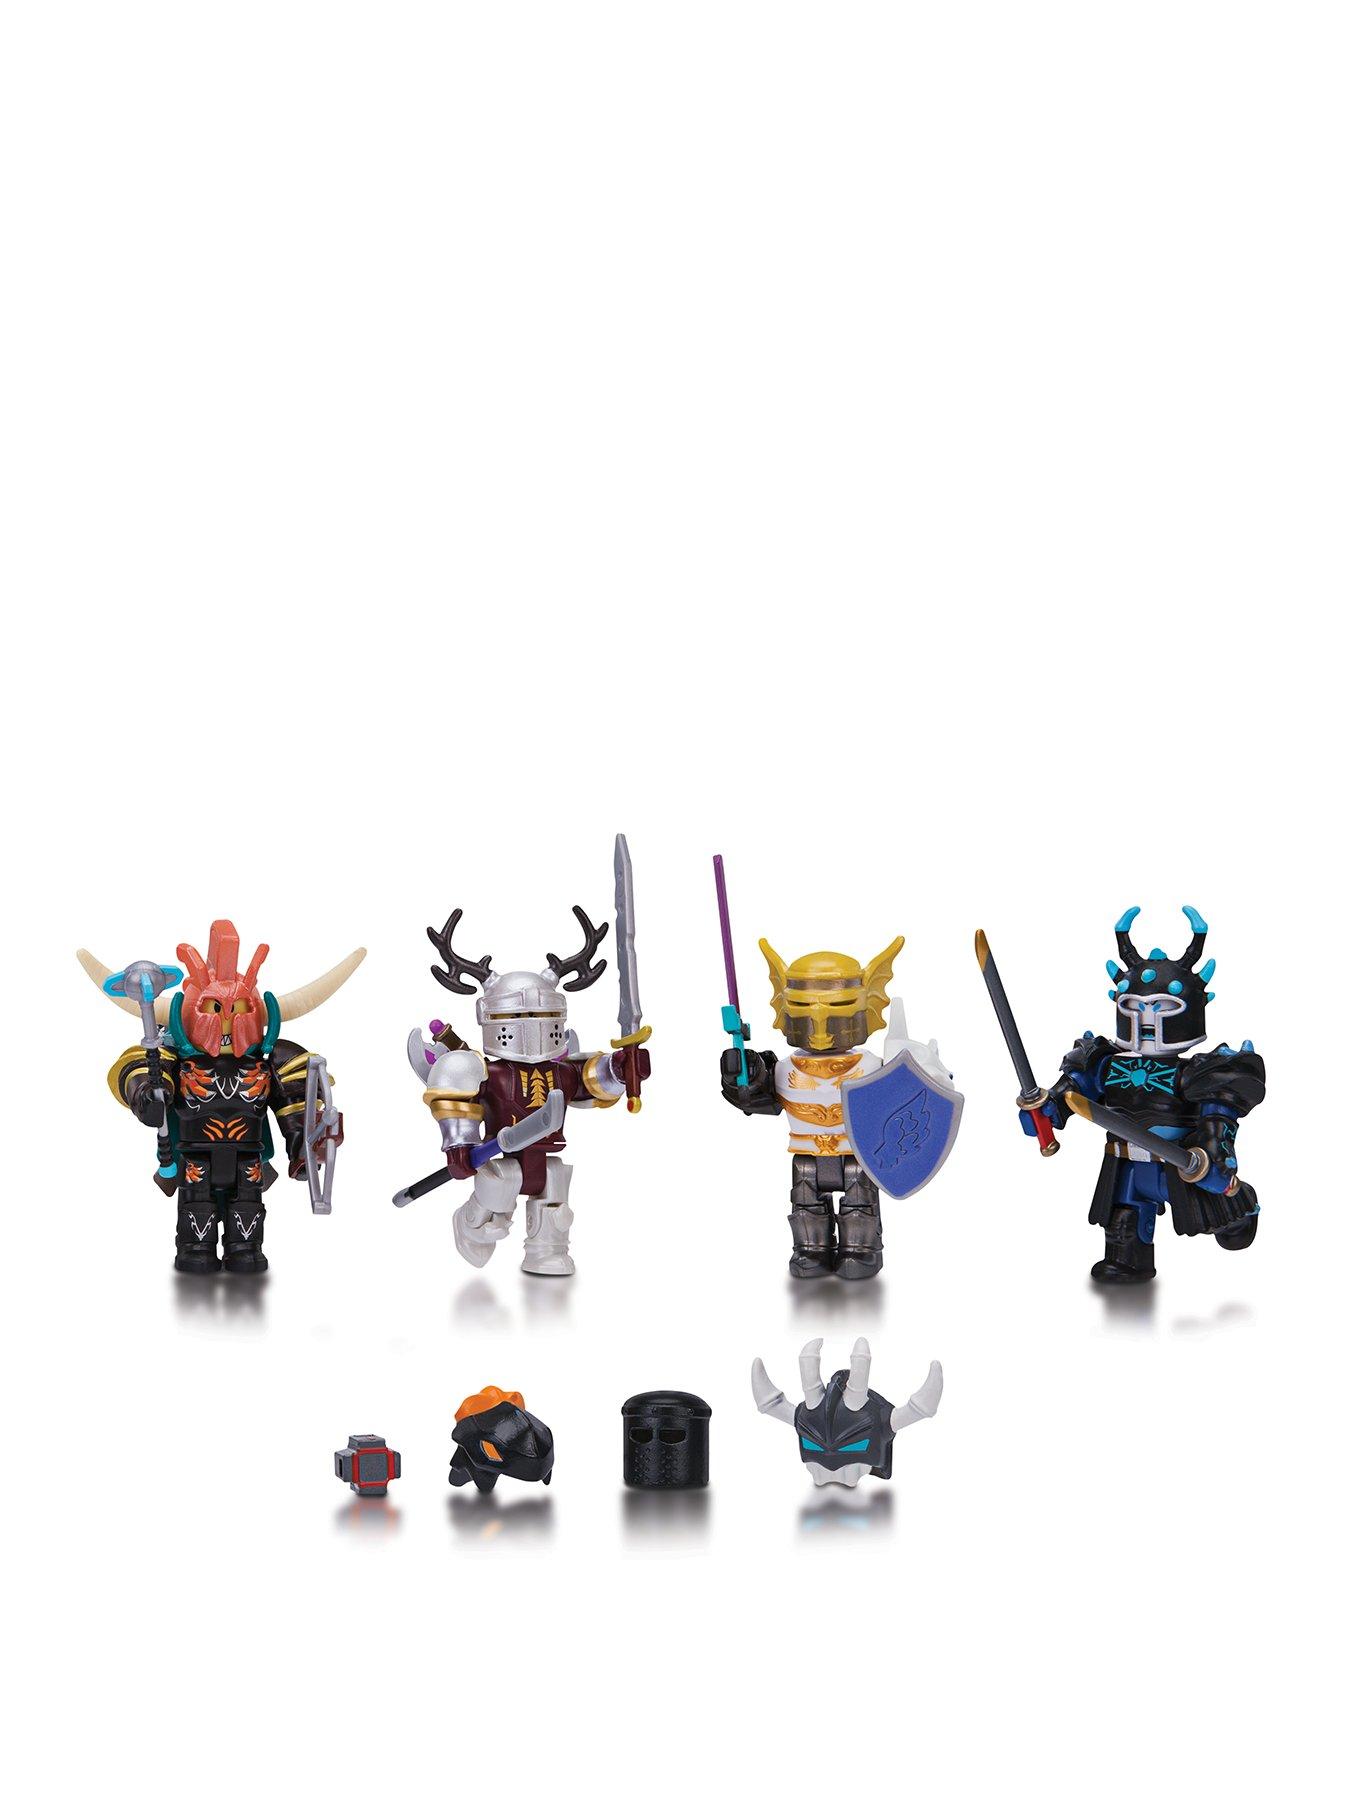 roblox mystery figures series 6 assortment roblox action figures playsets smyths toys uk